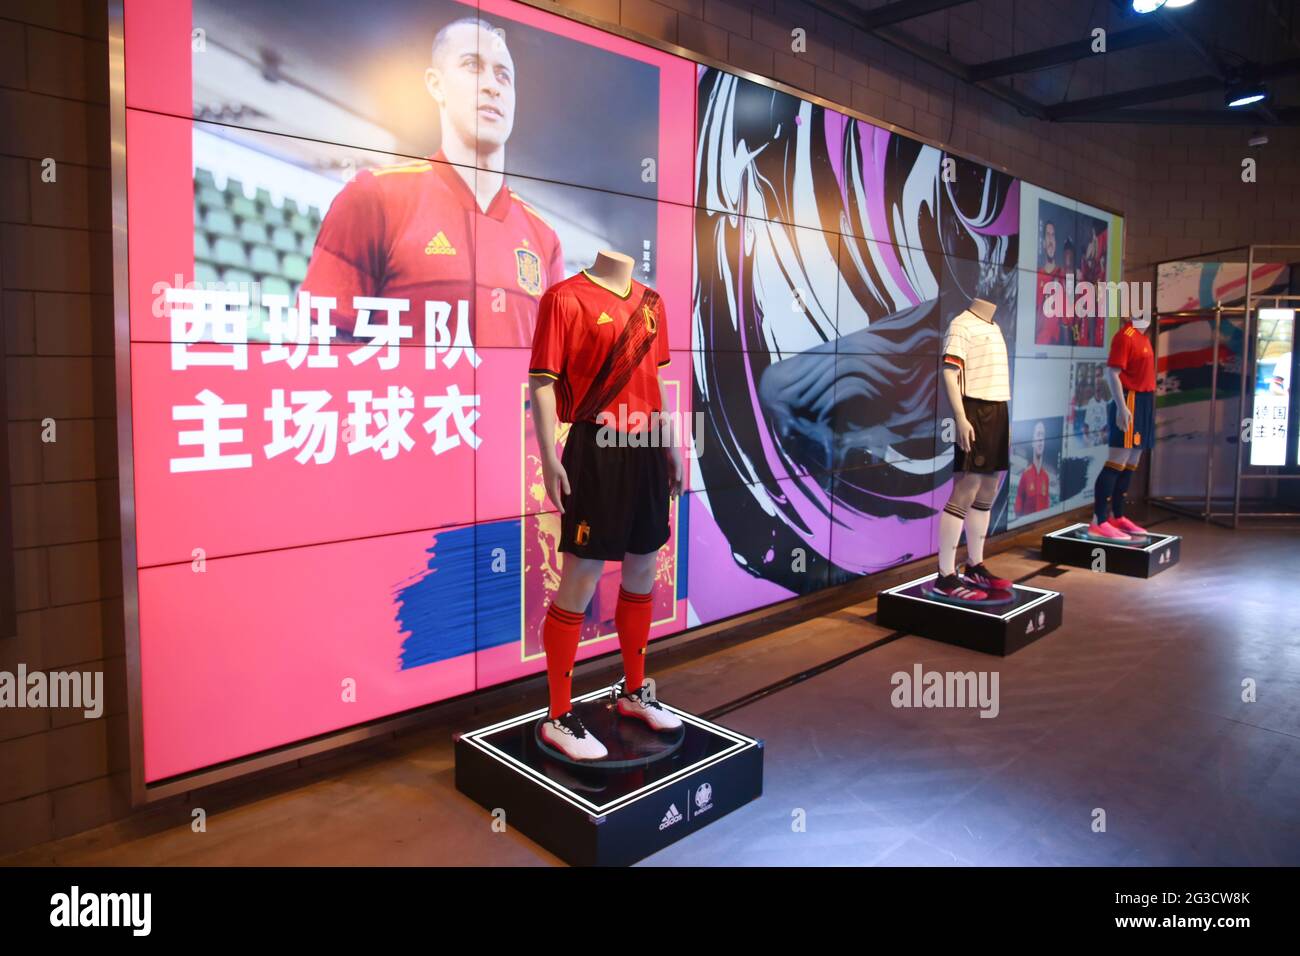 SHANGHAI, CHINA - JUNE 14, 2021 - A view of the official European  Championship football and kit exhibition at Adidas' flagship store on  Nanjing East Road, Shanghai, China, June 14, 2021. (Photo